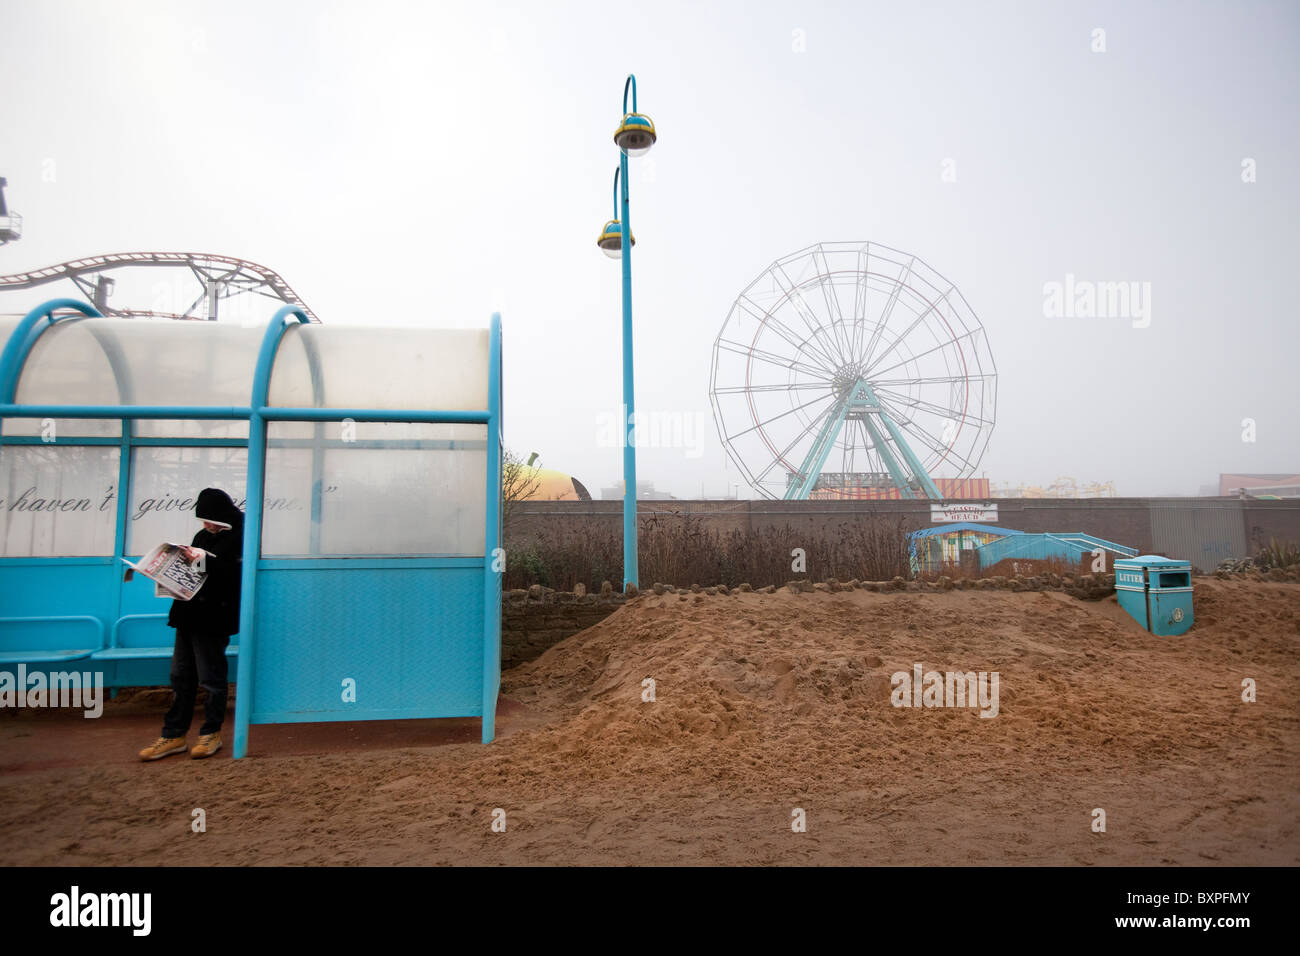 A man reading a newspaper shelters from the winter weather on the sea front at Skegness, UK. Stock Photo